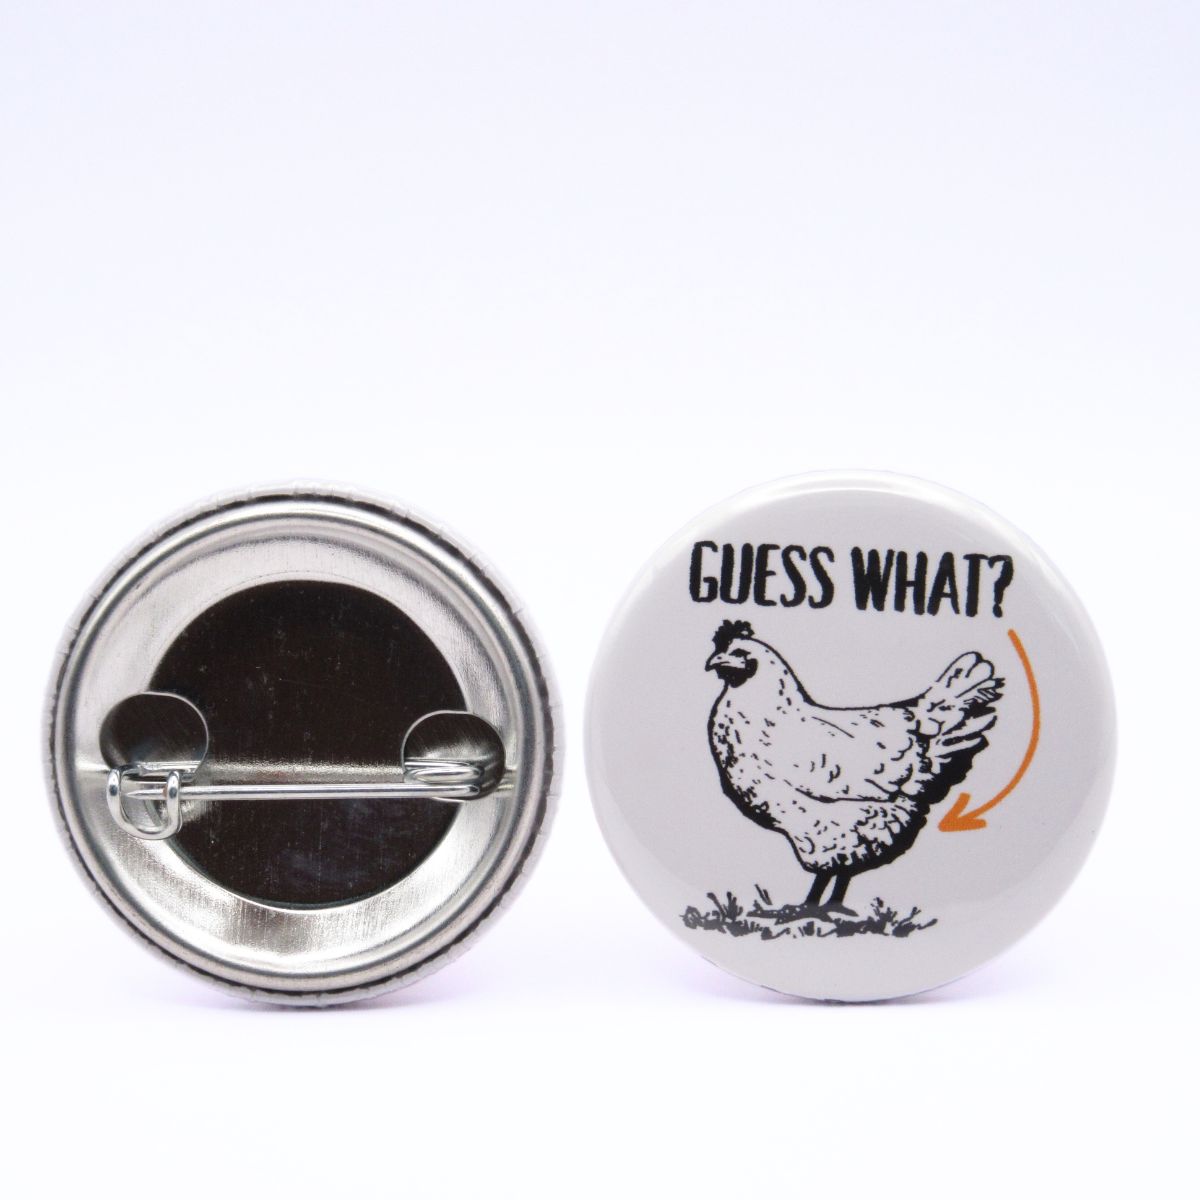 BooBooRoo Pinback Button (i.e. button, badge, pin) for the Guess What Chicken Butt, Guess Why Chicken Thigh, and Guess Who Chicken Shoe three-button pack. Image showing front and back of high-quality metal button.